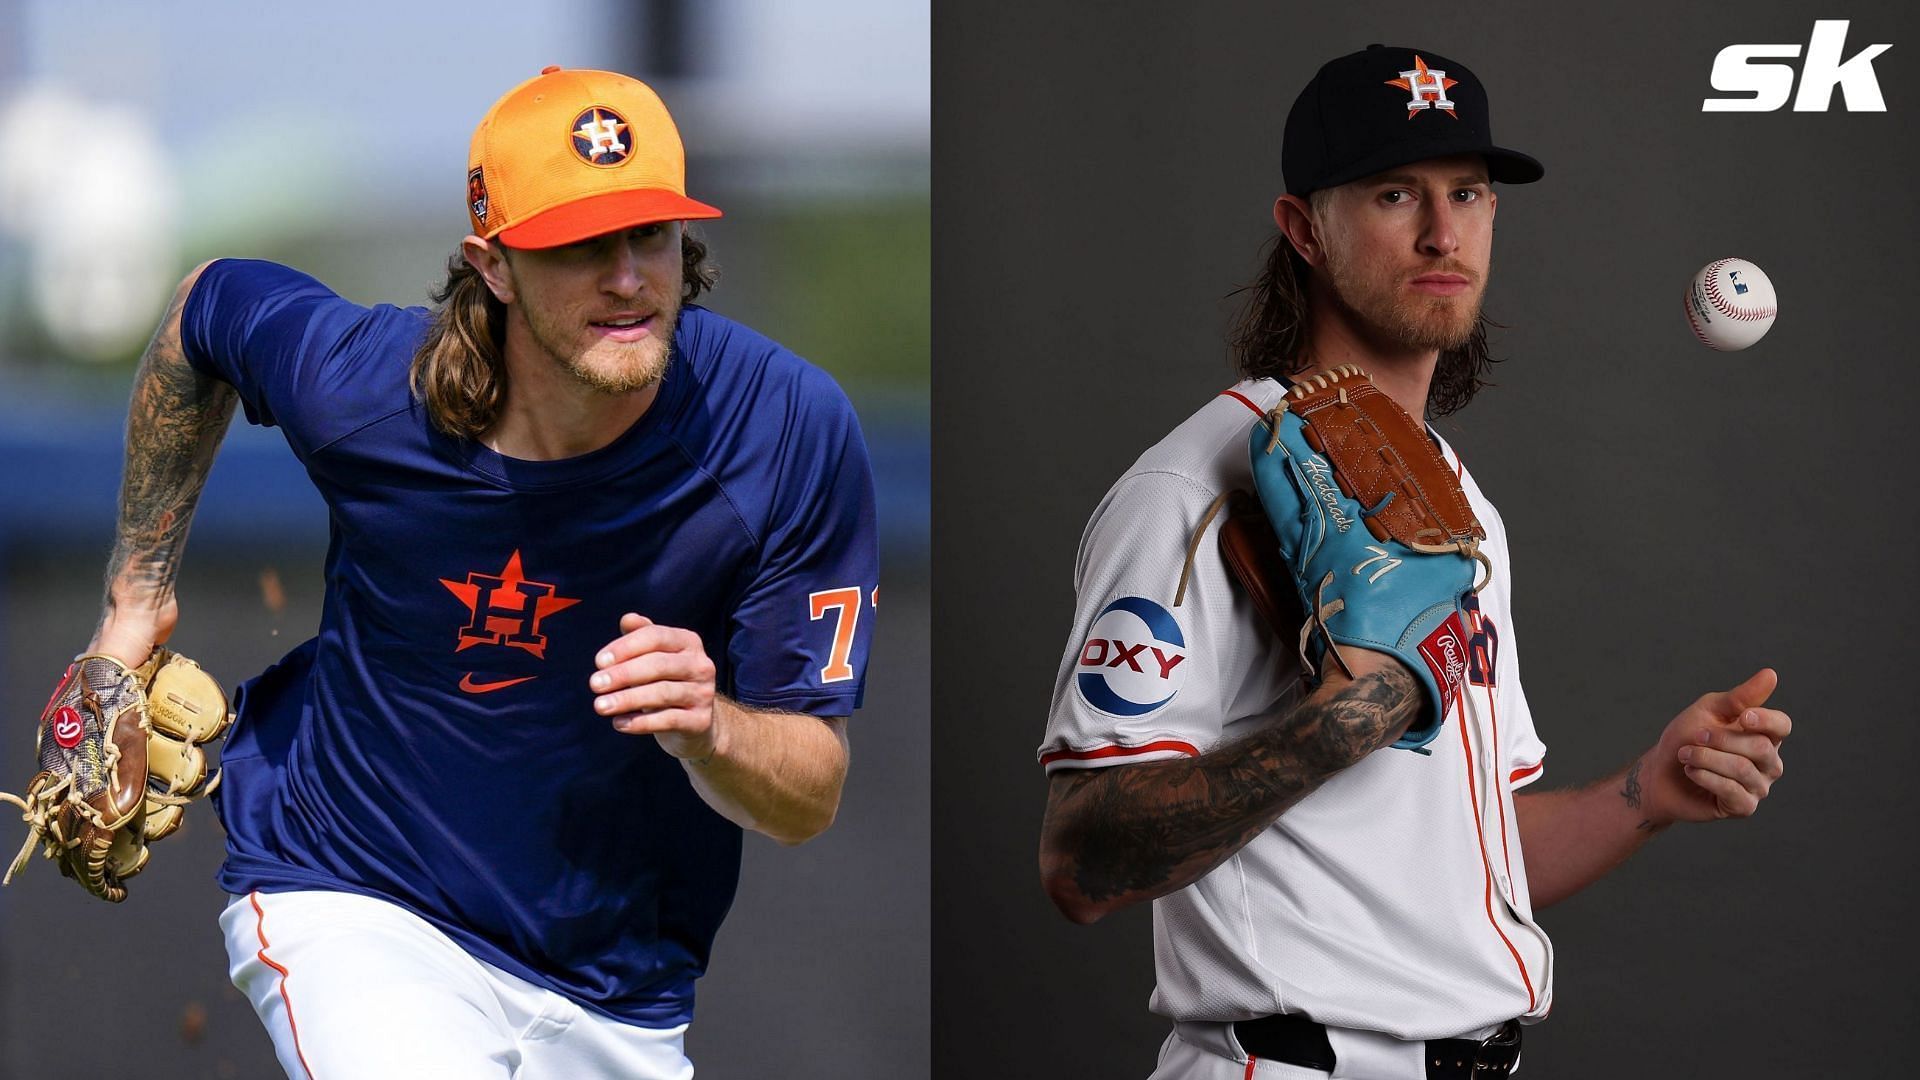 Baseball fans have trolled Astros closer Josh Hader after giving up pair of home runs versus Marlins